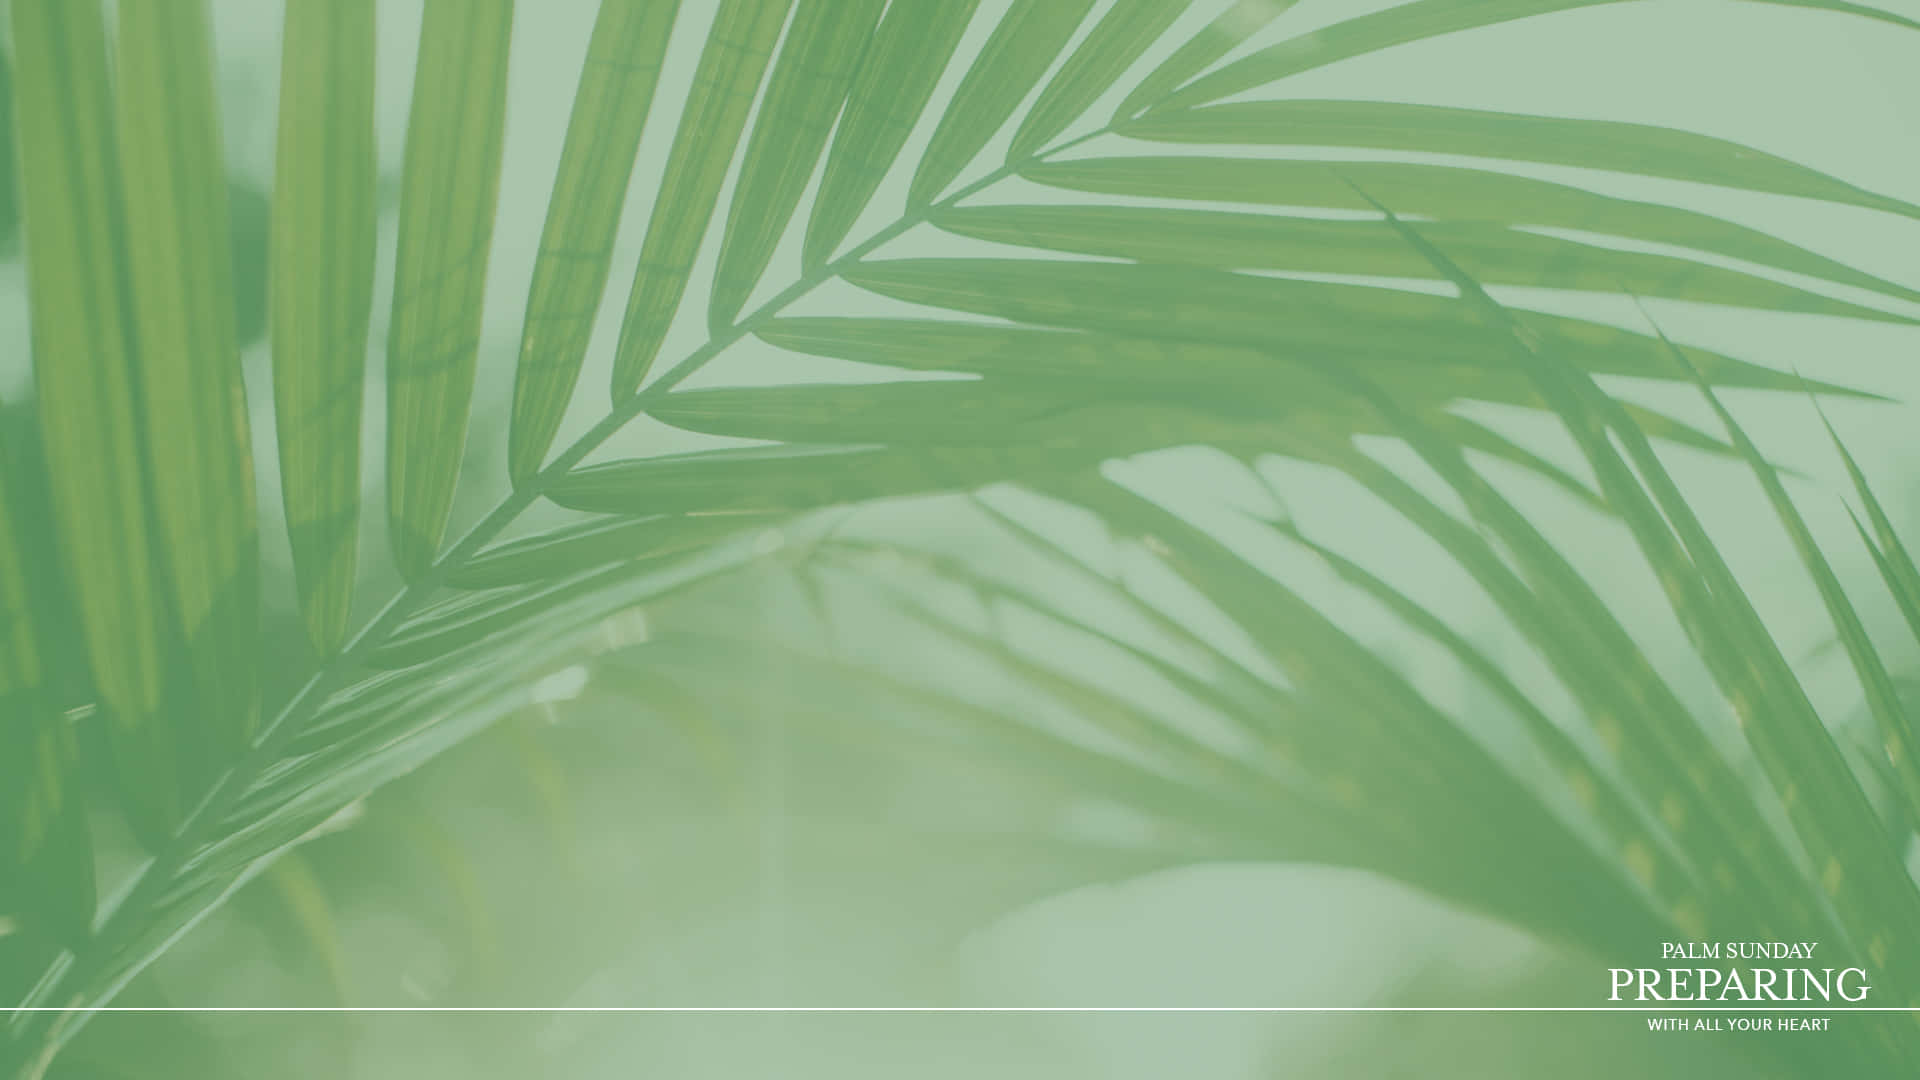 Download Foggy Palm Leaves For Palm Sunday Background | Wallpapers.com